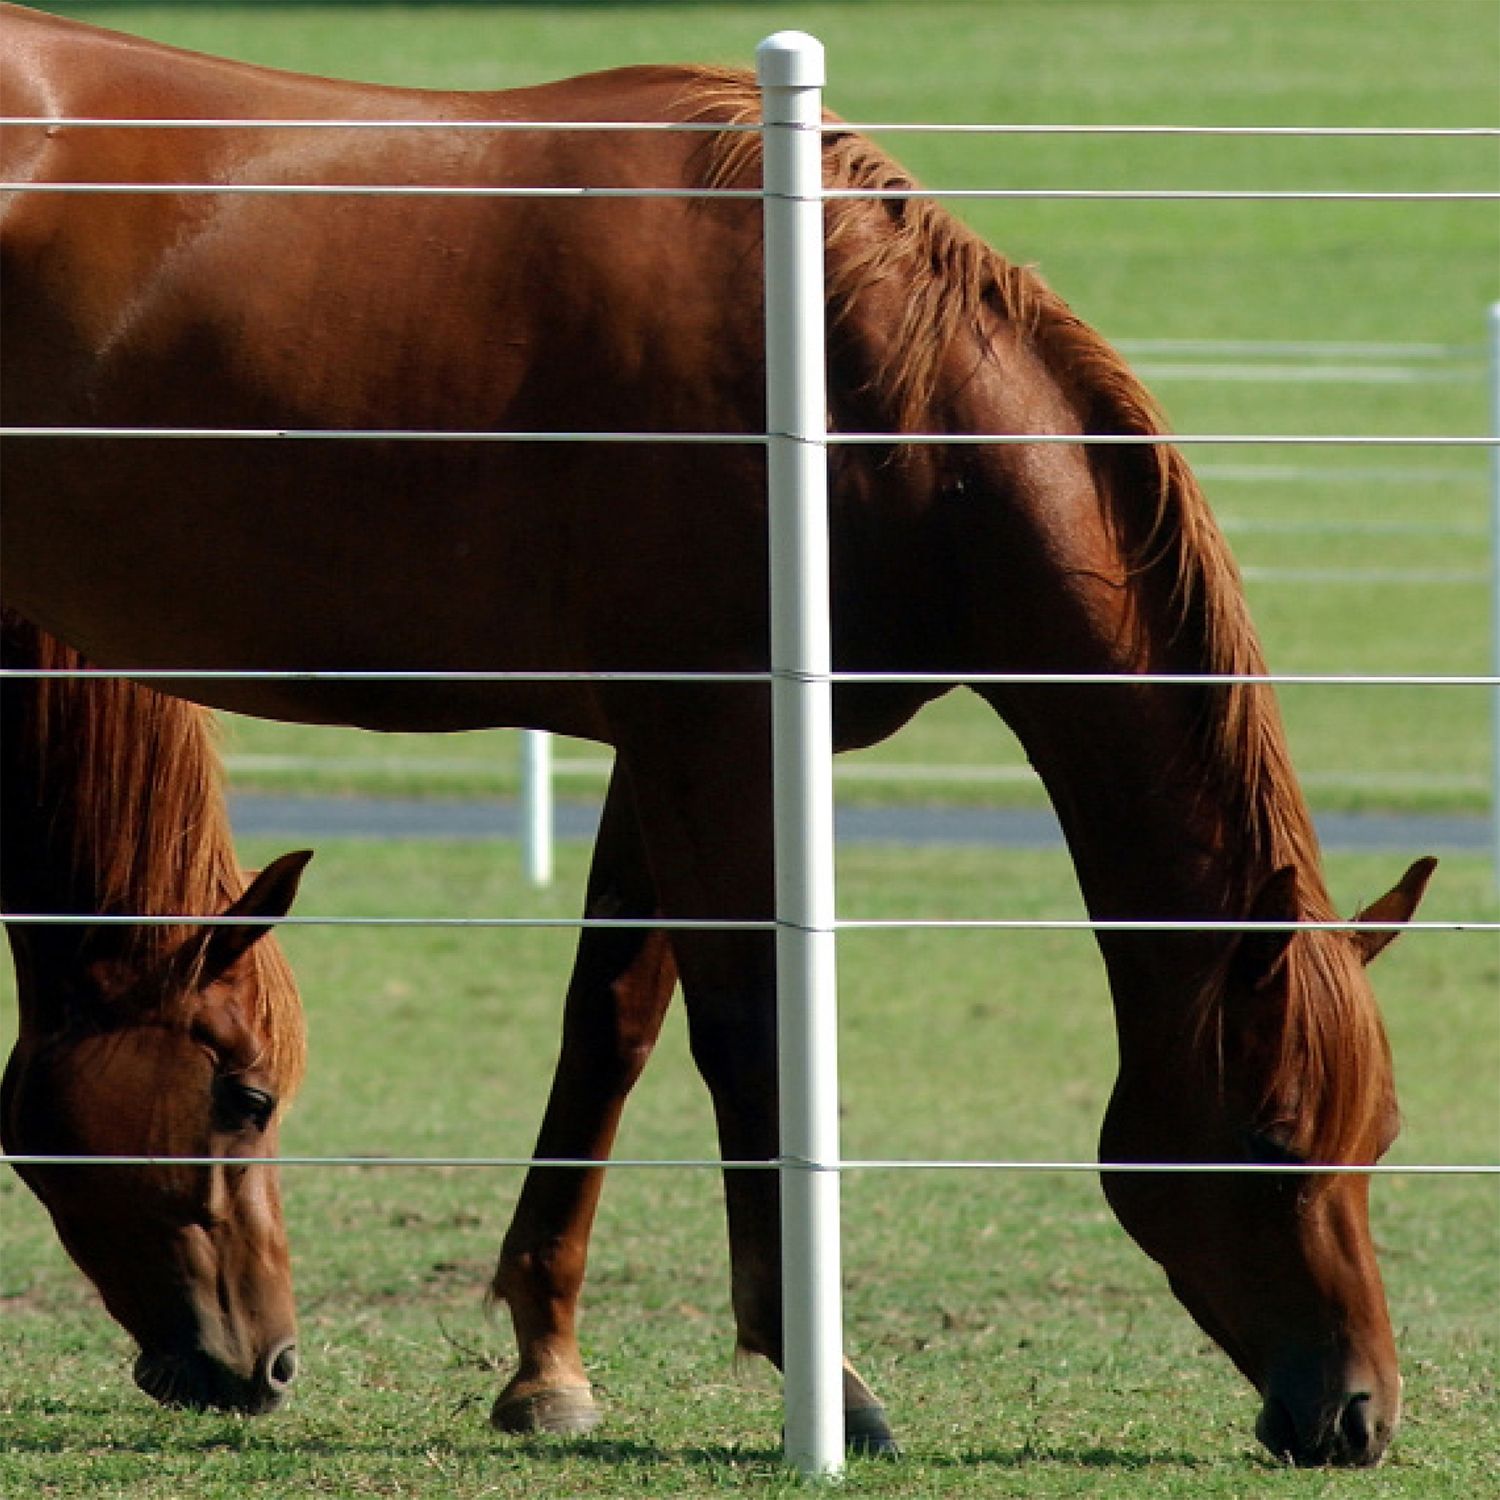 Selecting and Installing High Tensile Horse Fence